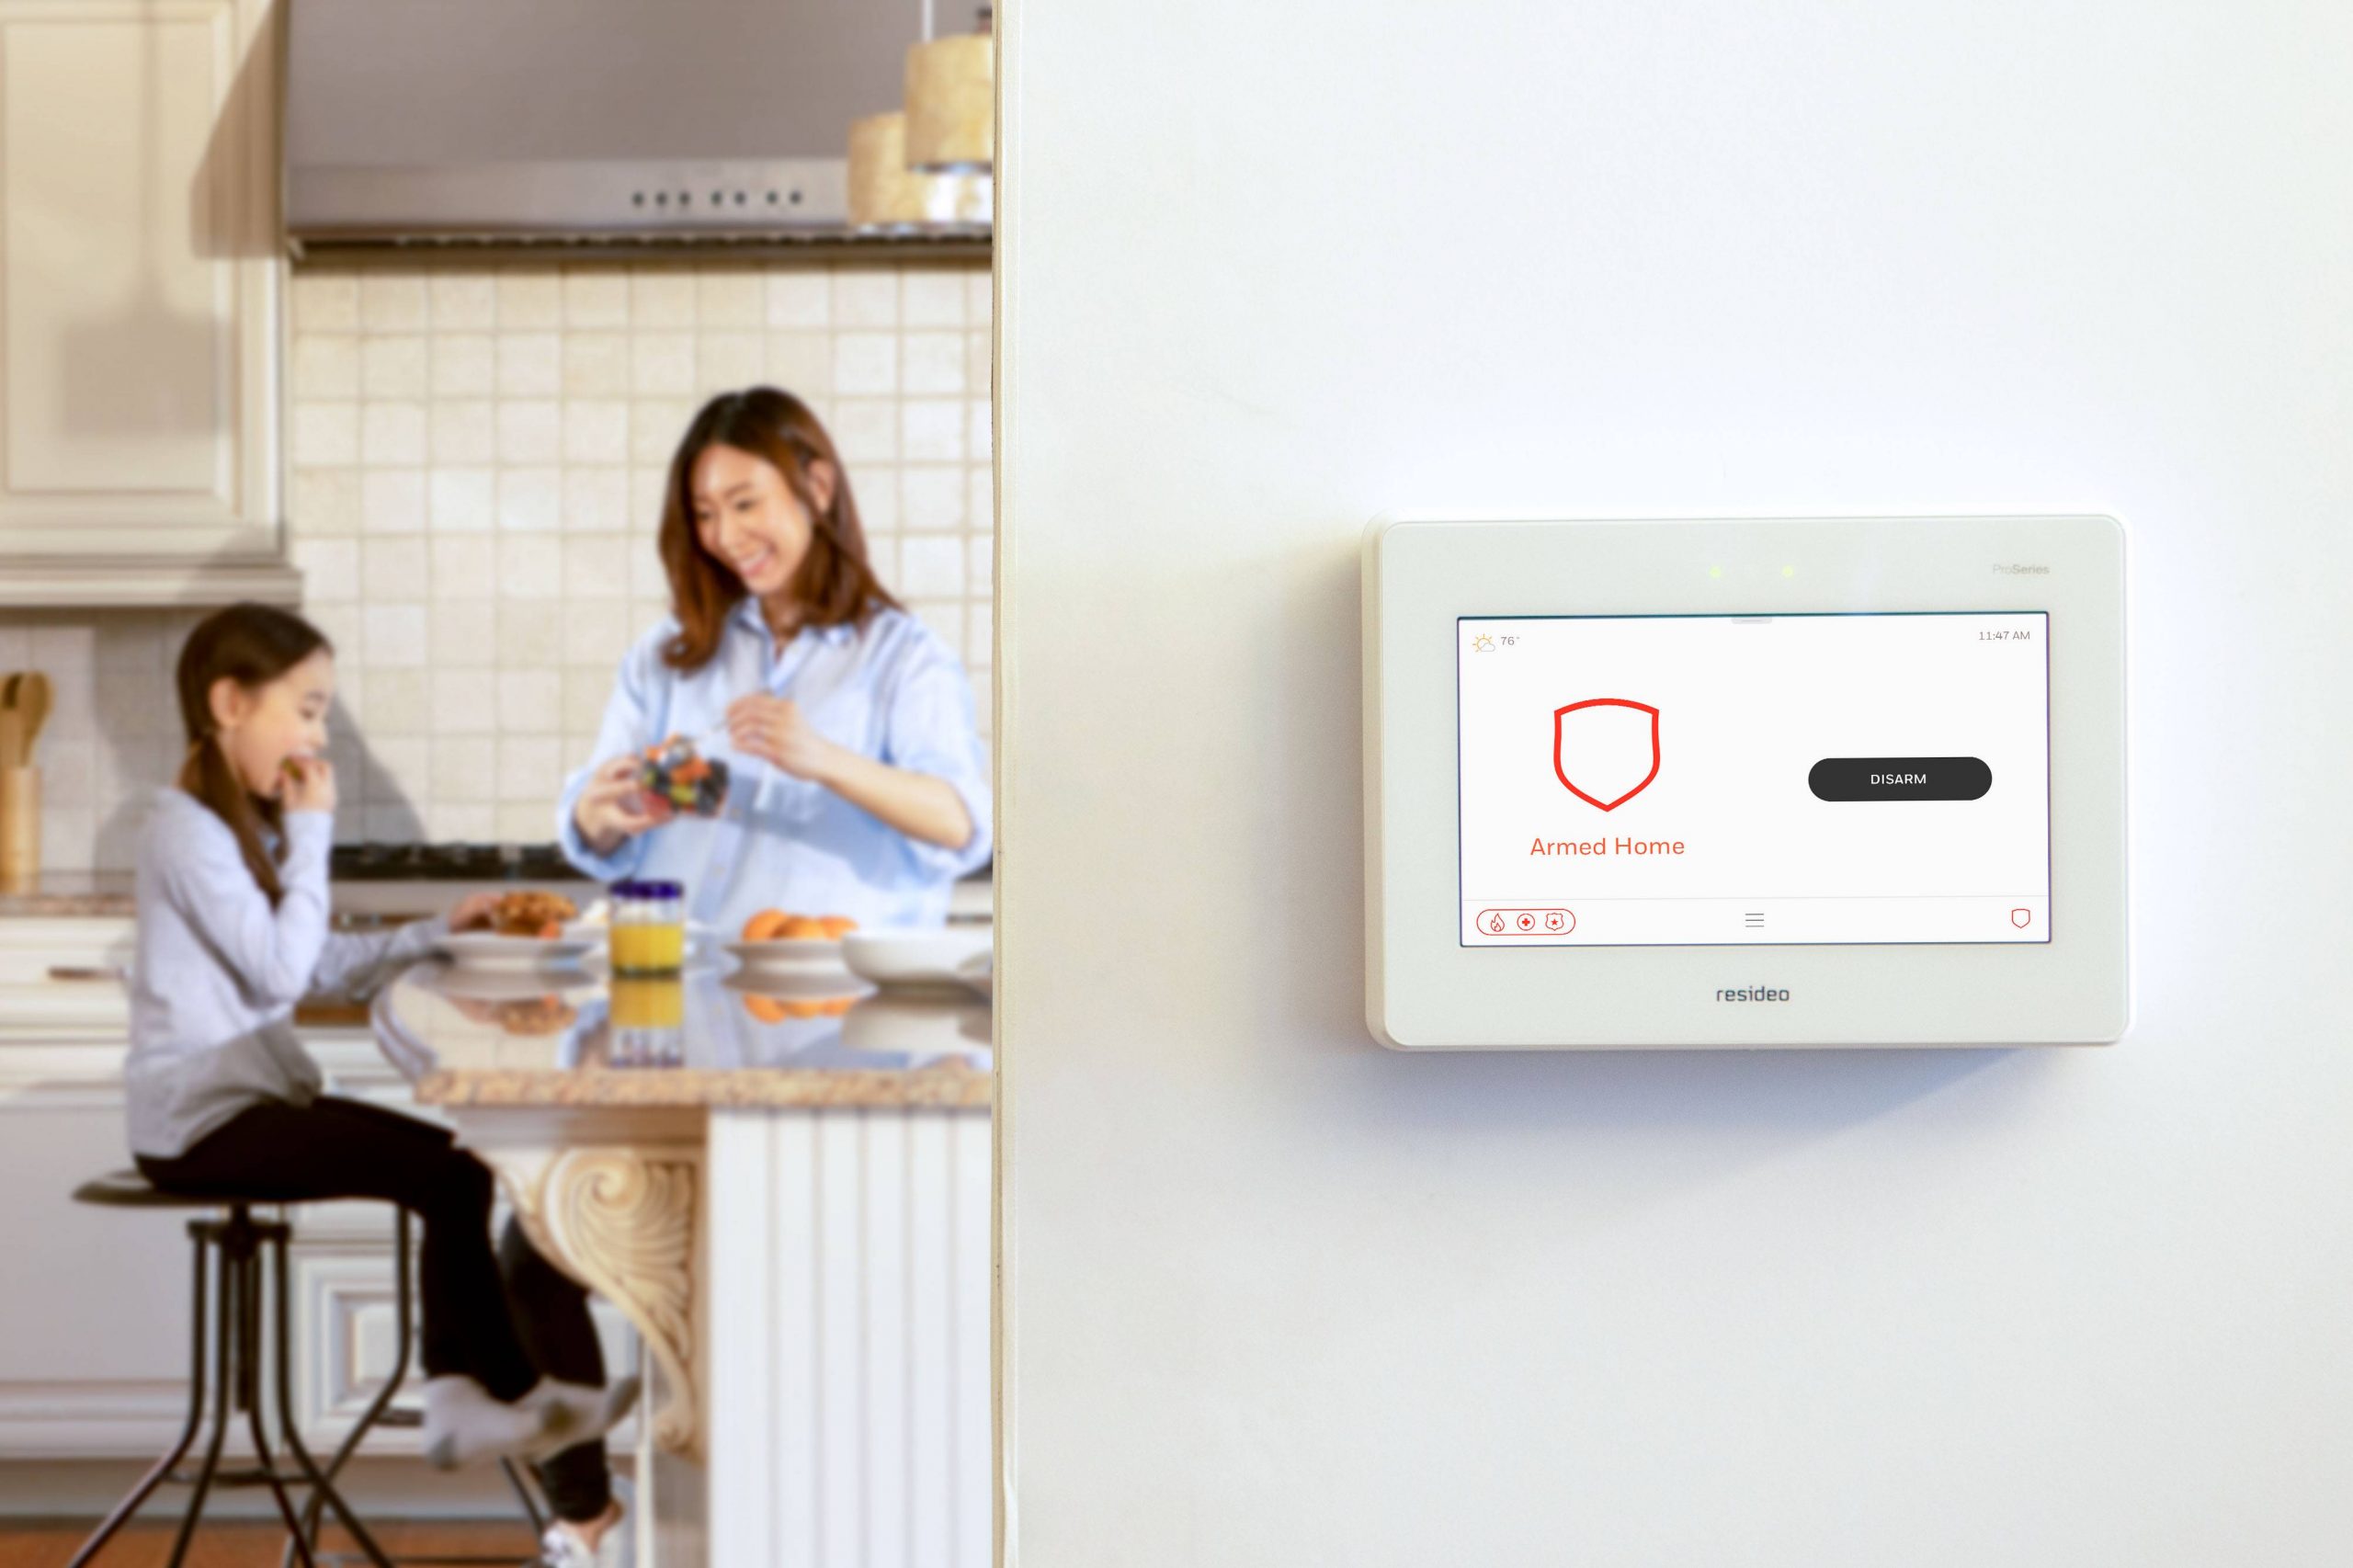 Woman and daughter in kitchen with alarm system on